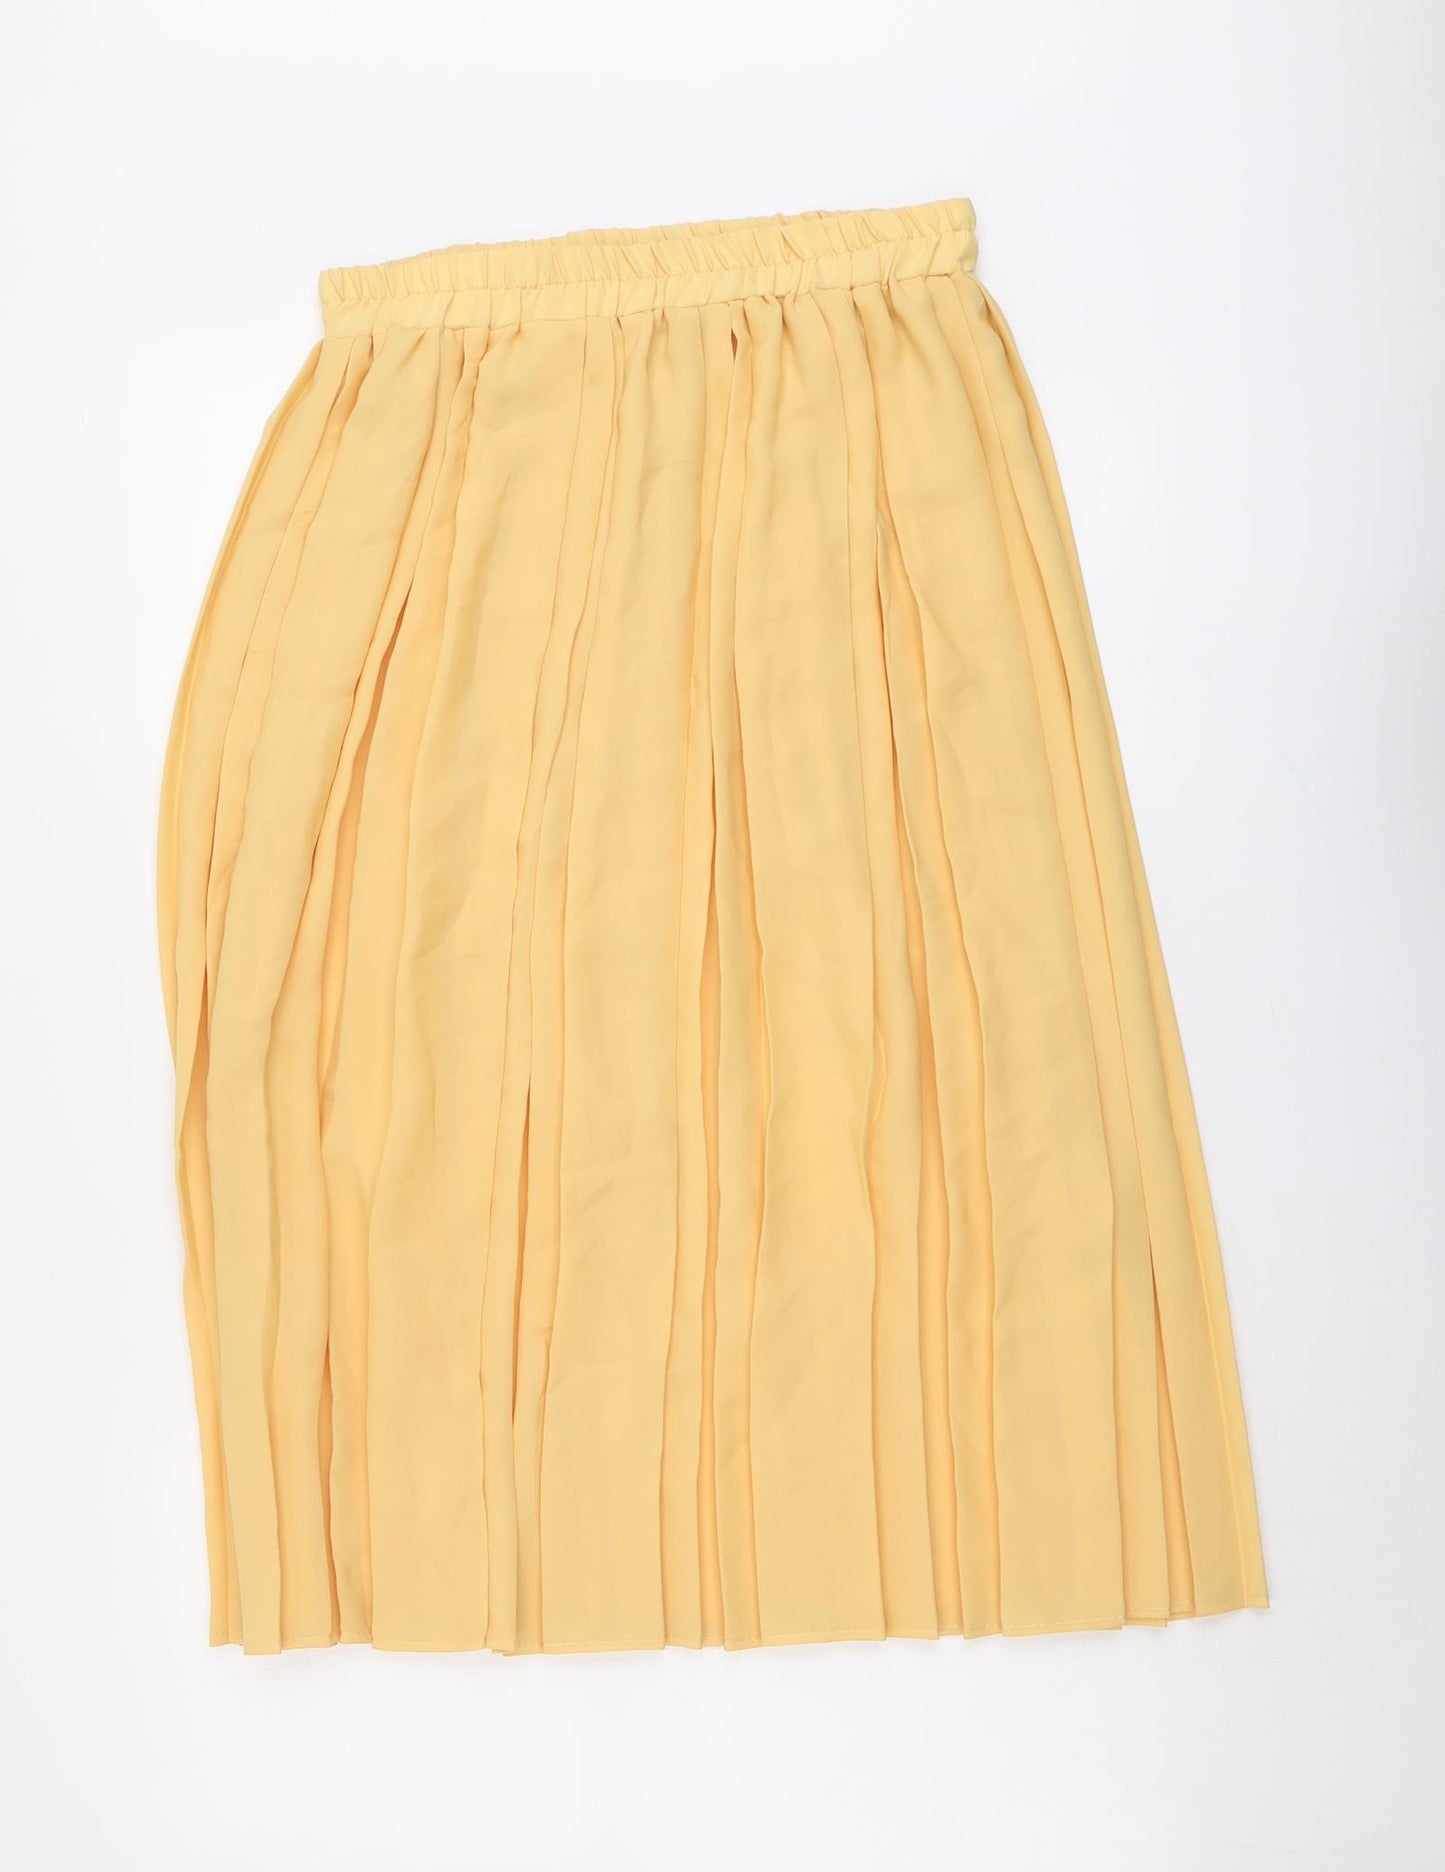 Retro Womens Yellow Polyester Pleated Skirt Size 14